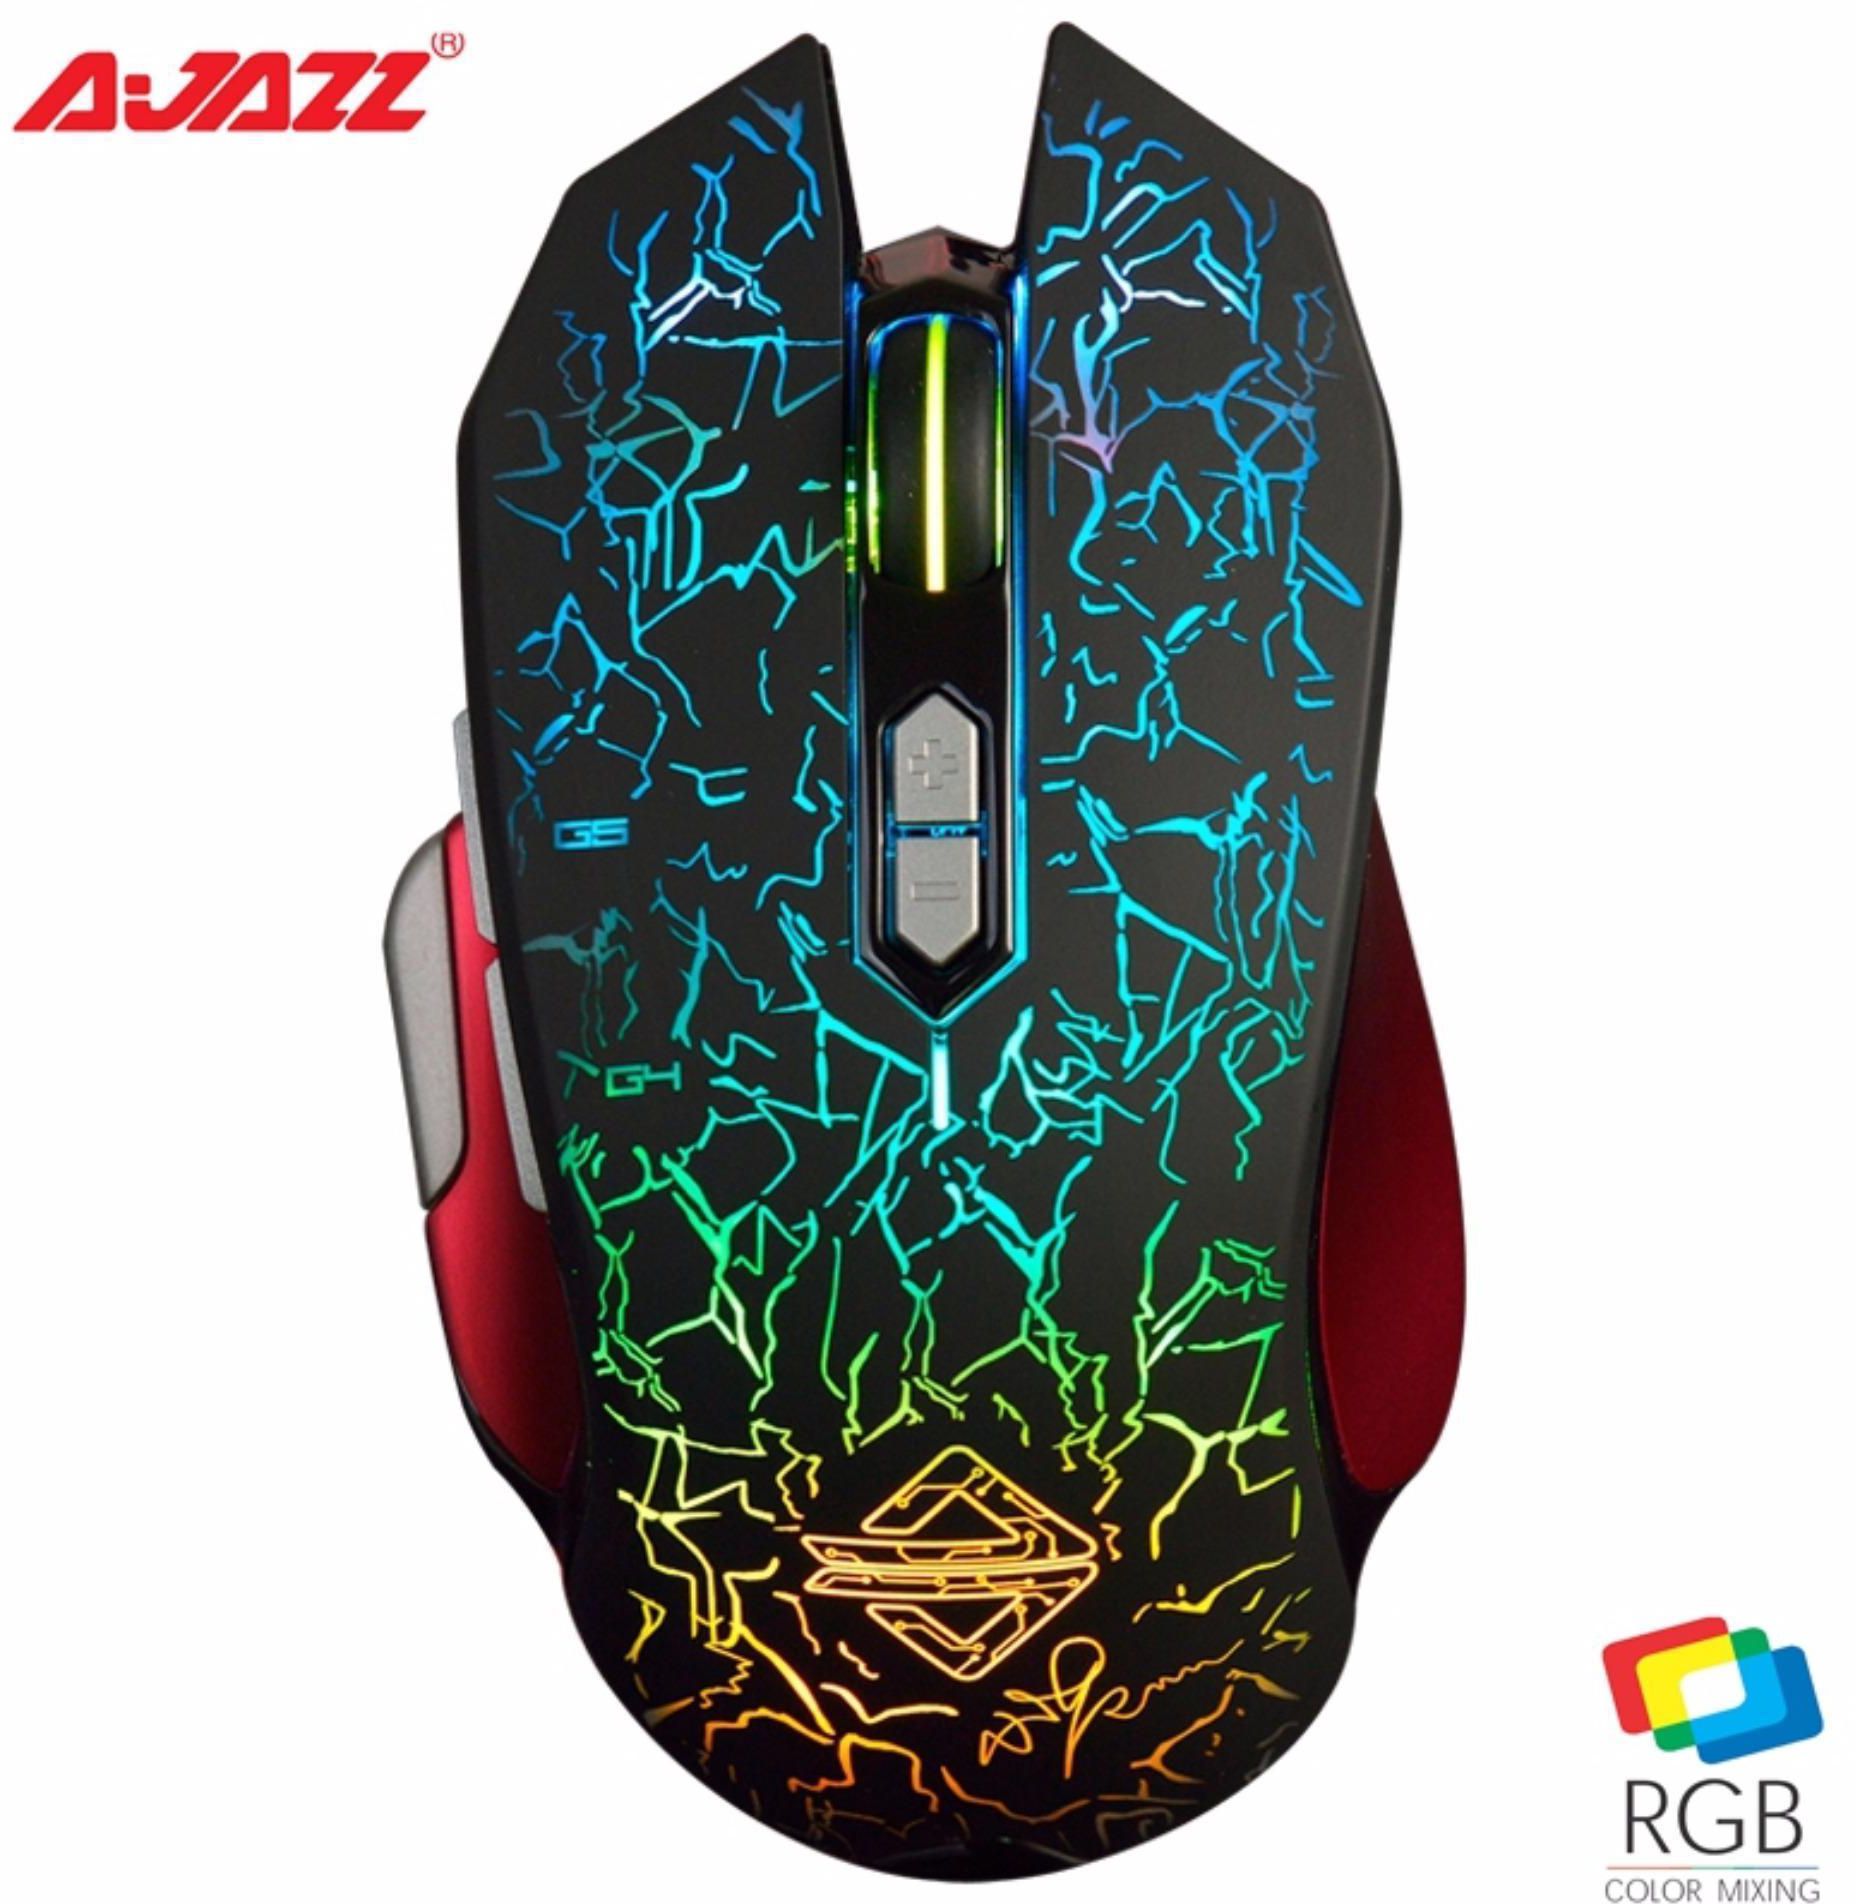 Ajazz Gt Aj380 Xc Rgb Gaming Wired Mouse Crack Design Xiaocang 9 Button (Black/Red)